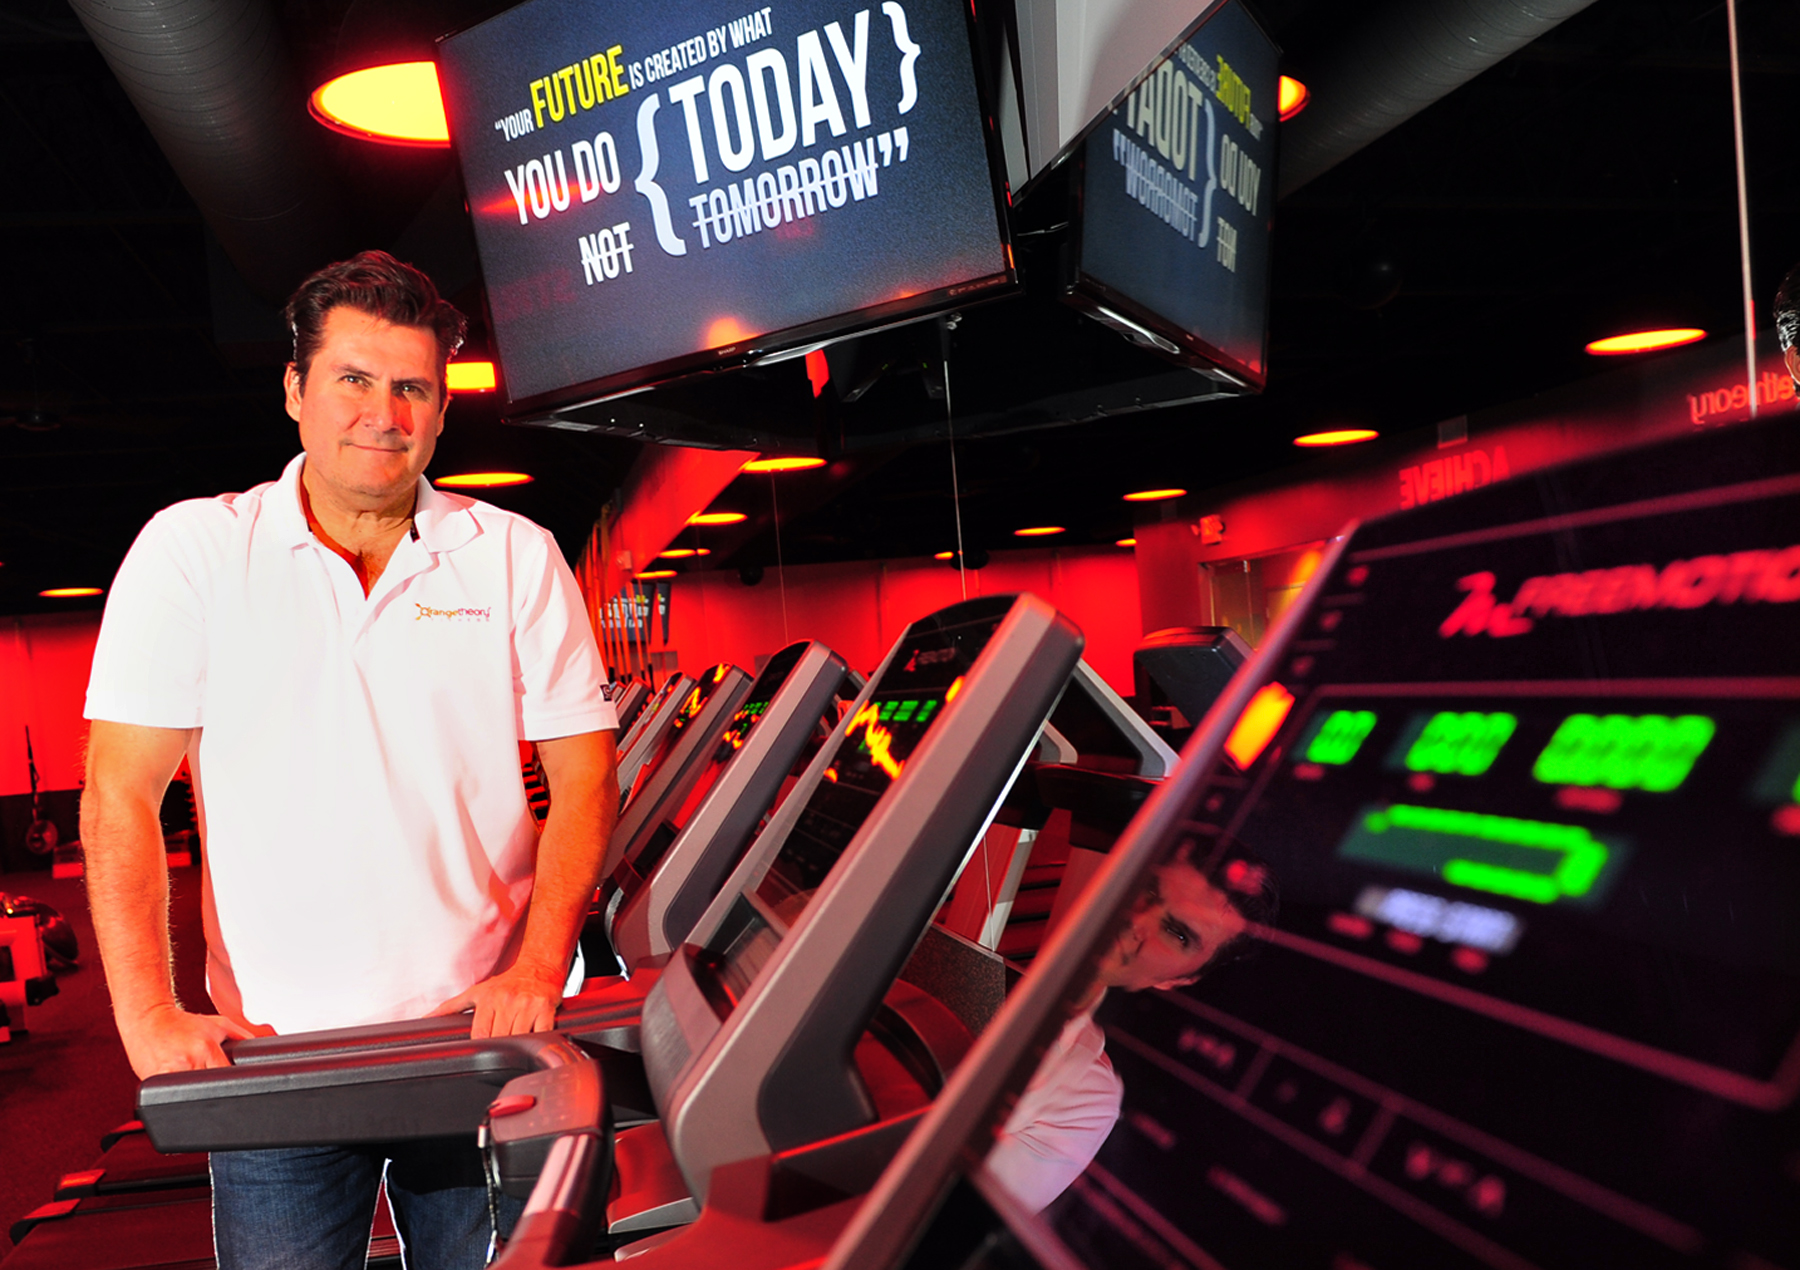 South Florida-based Orangetheory Fitness in healthy expansion mode